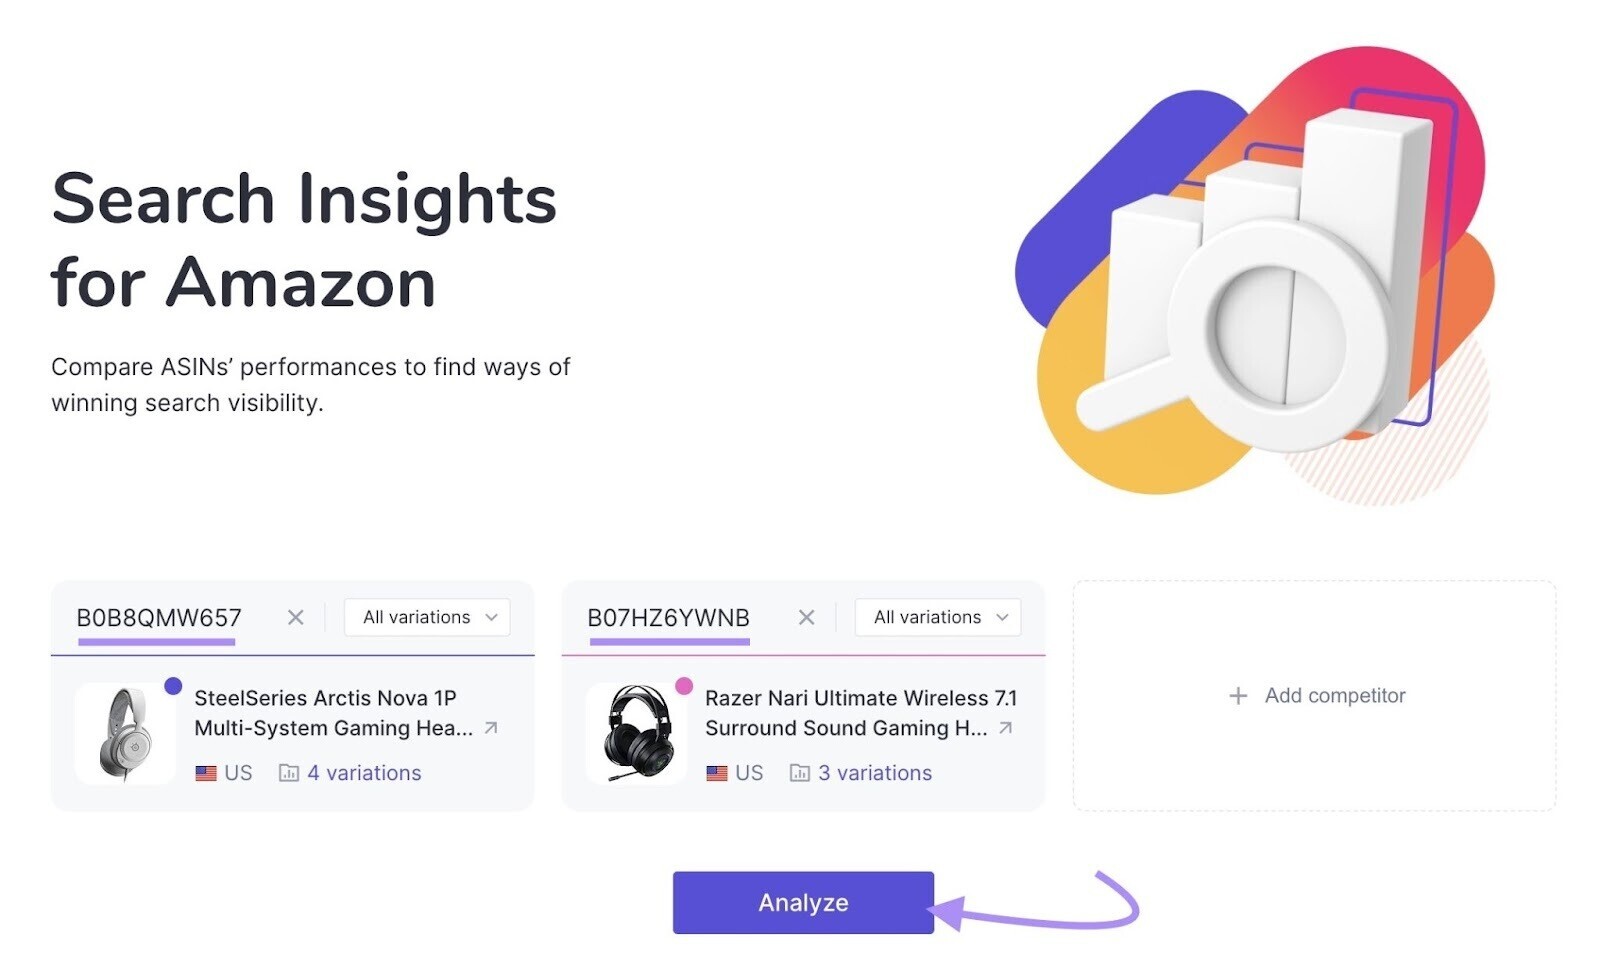 Search Insights for Amazon tool